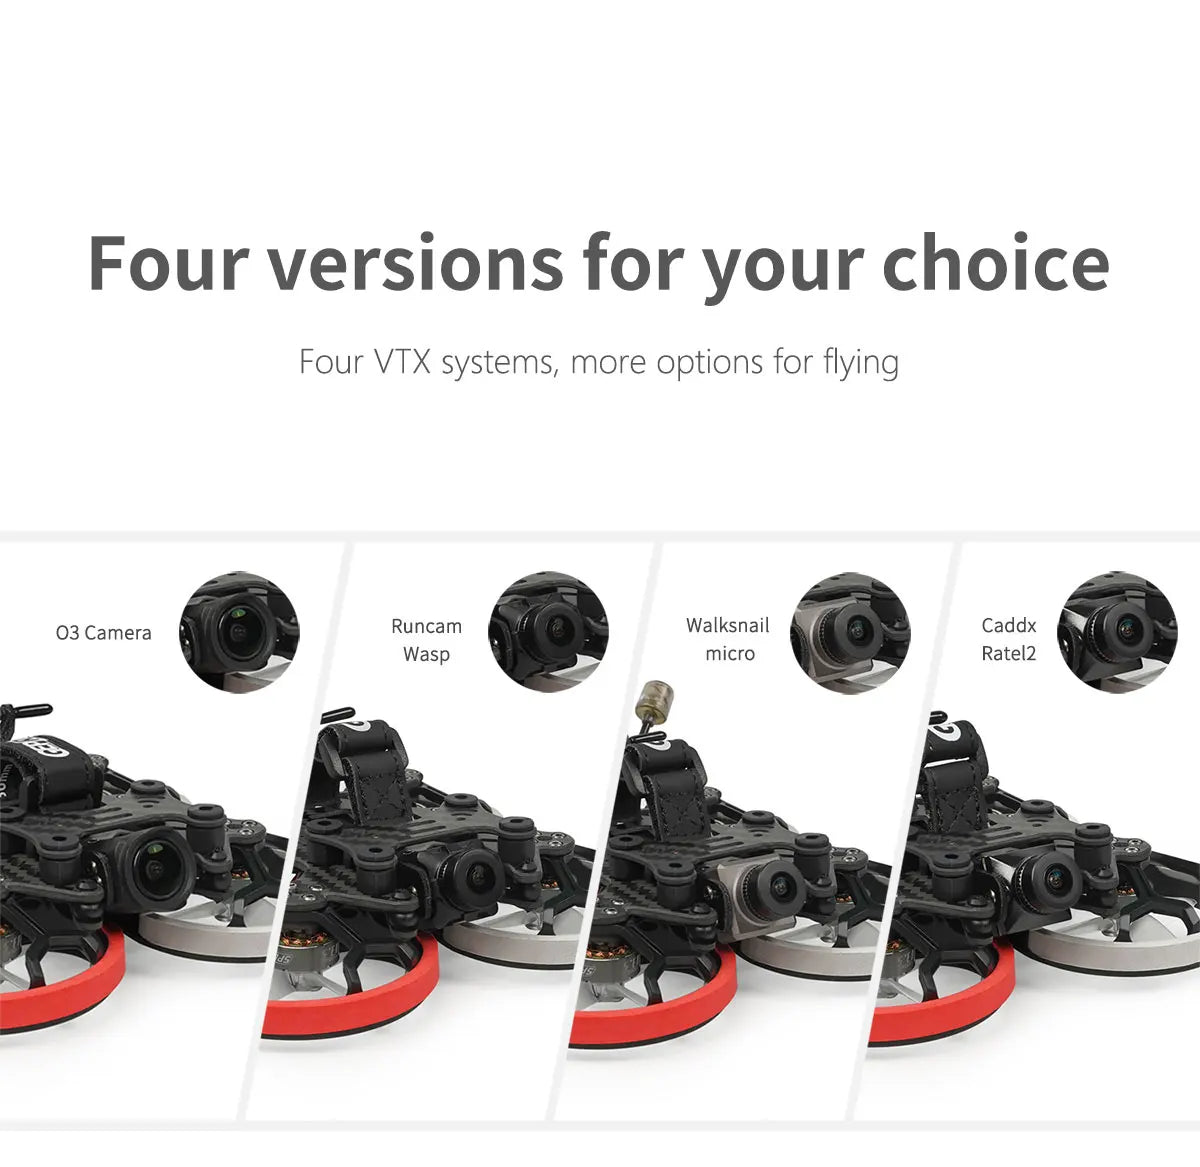 GEPRC Cinelog20 Analog FPV Drone, four versions for your choice Four VTX systems, more options for flying 03 Camera Runcam